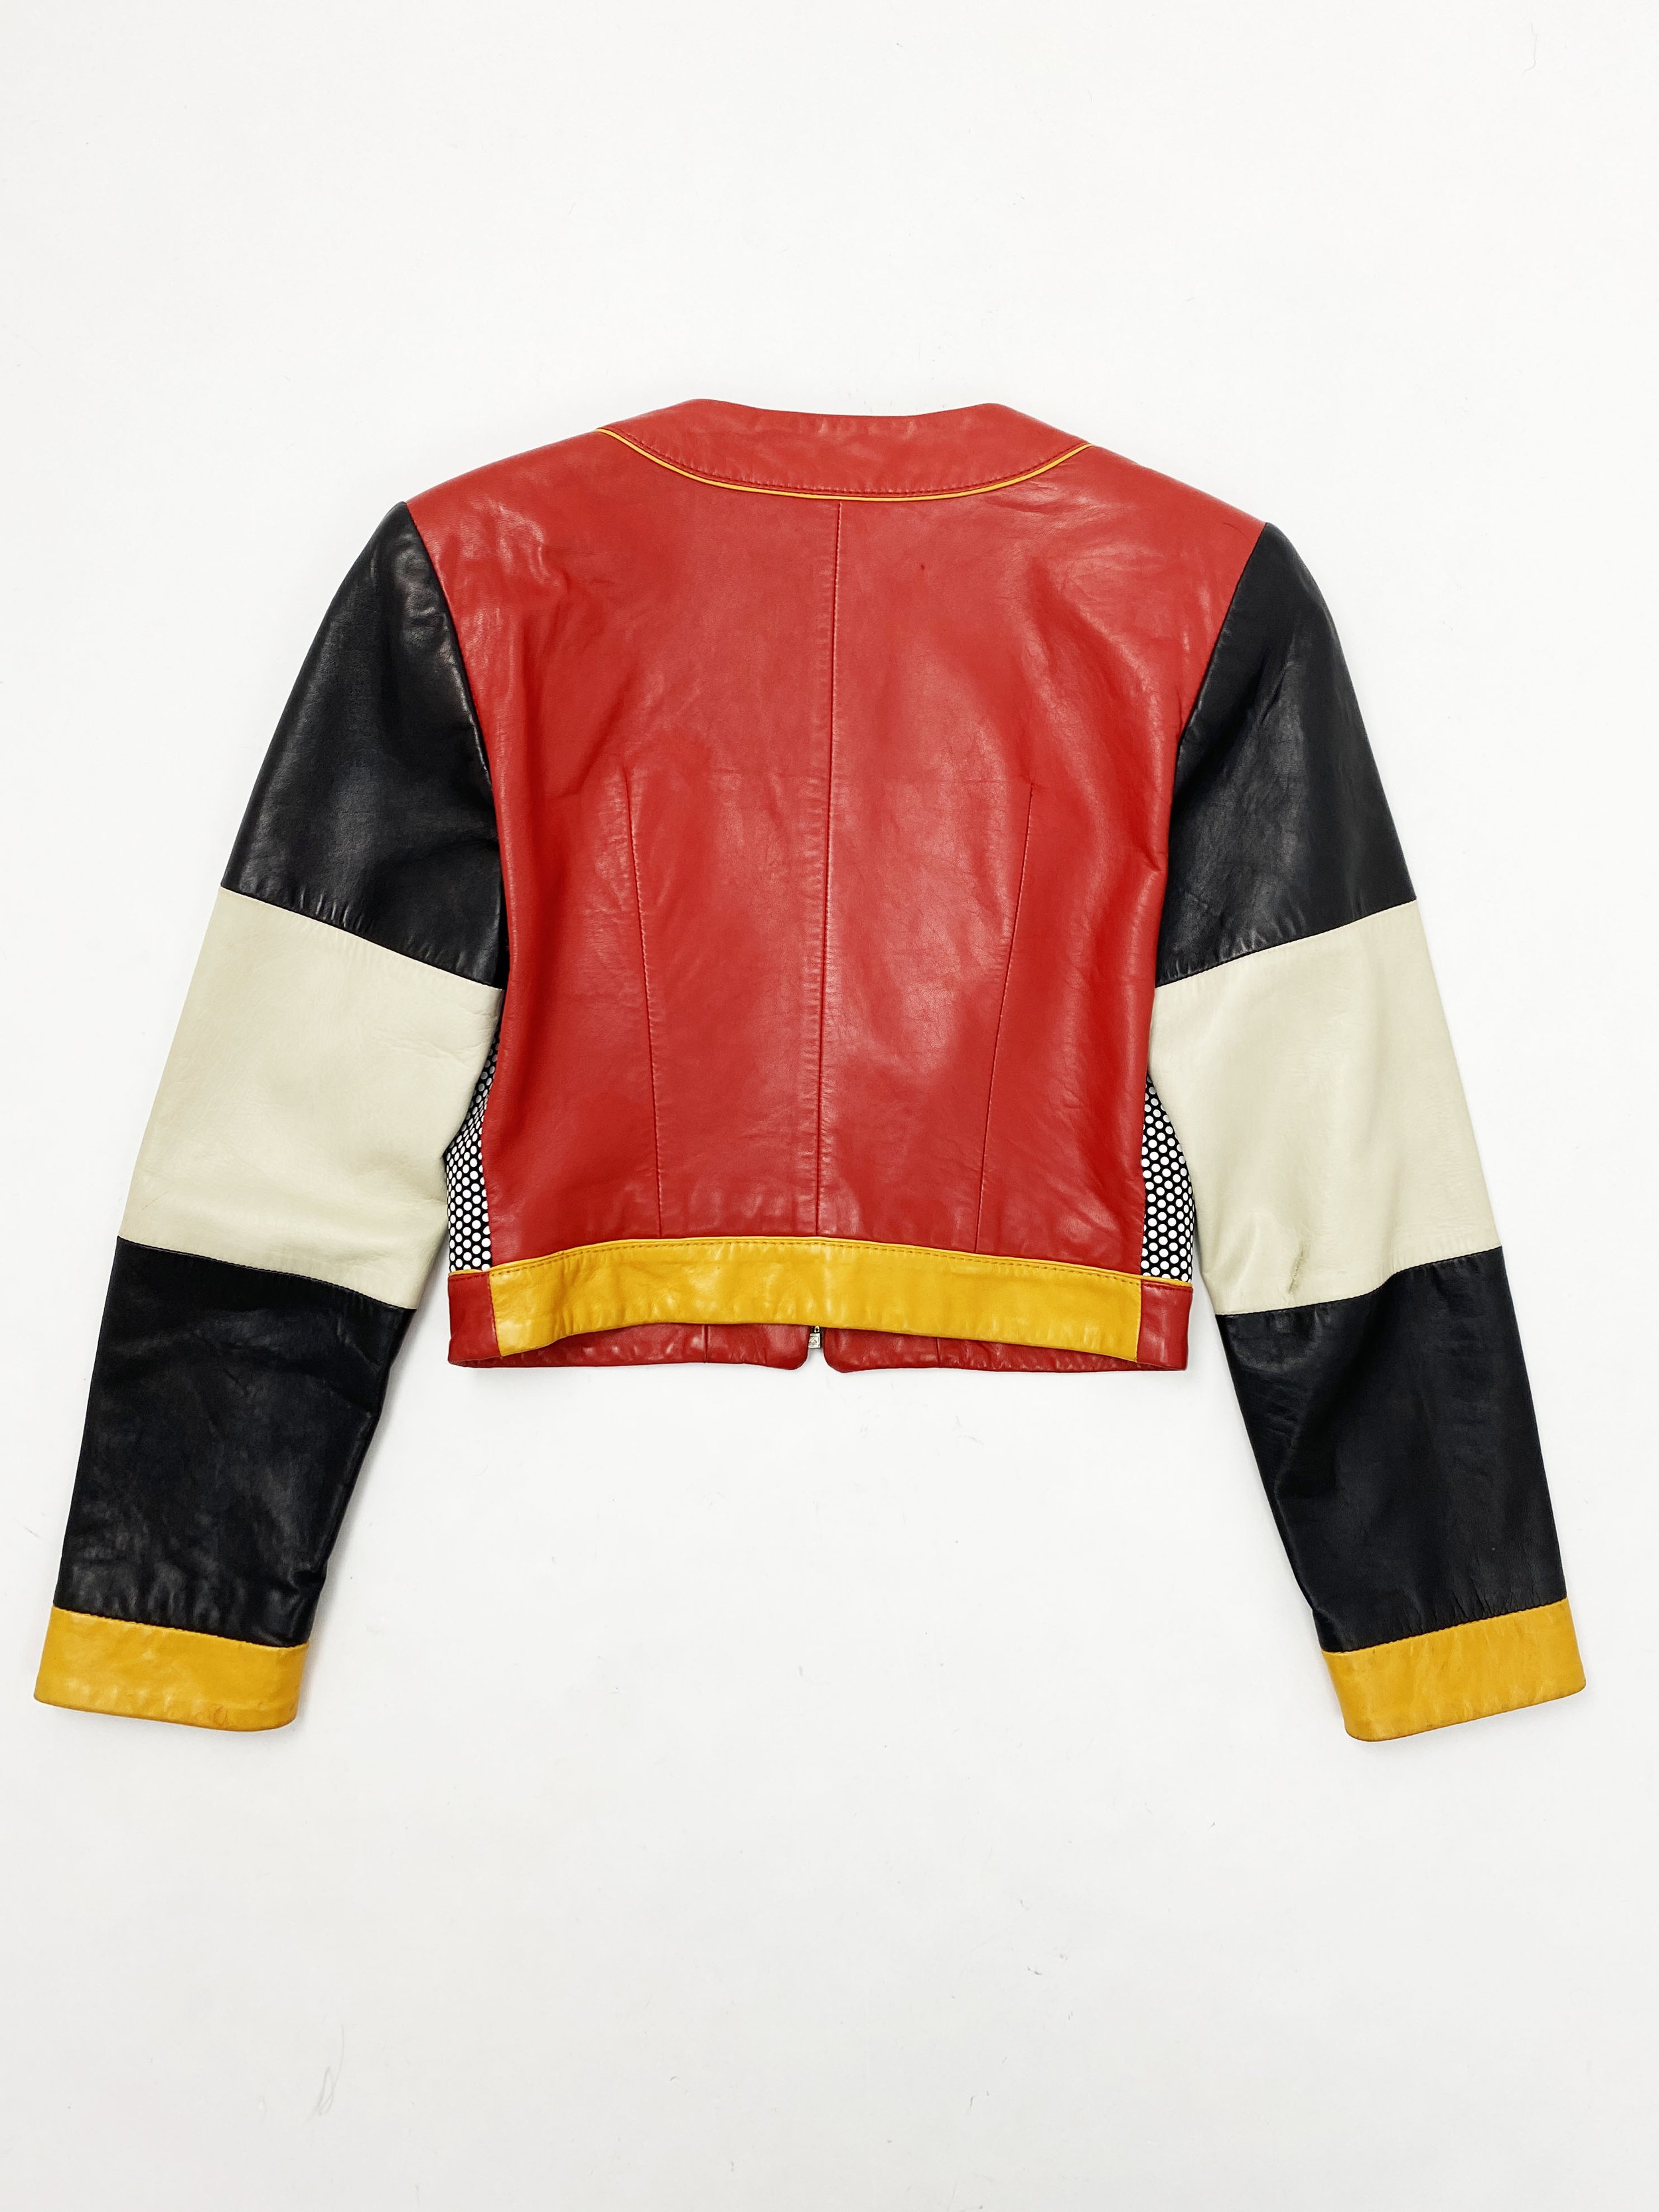 Moschino s Mickey Mouse leather jacket — JAMES VELORIA